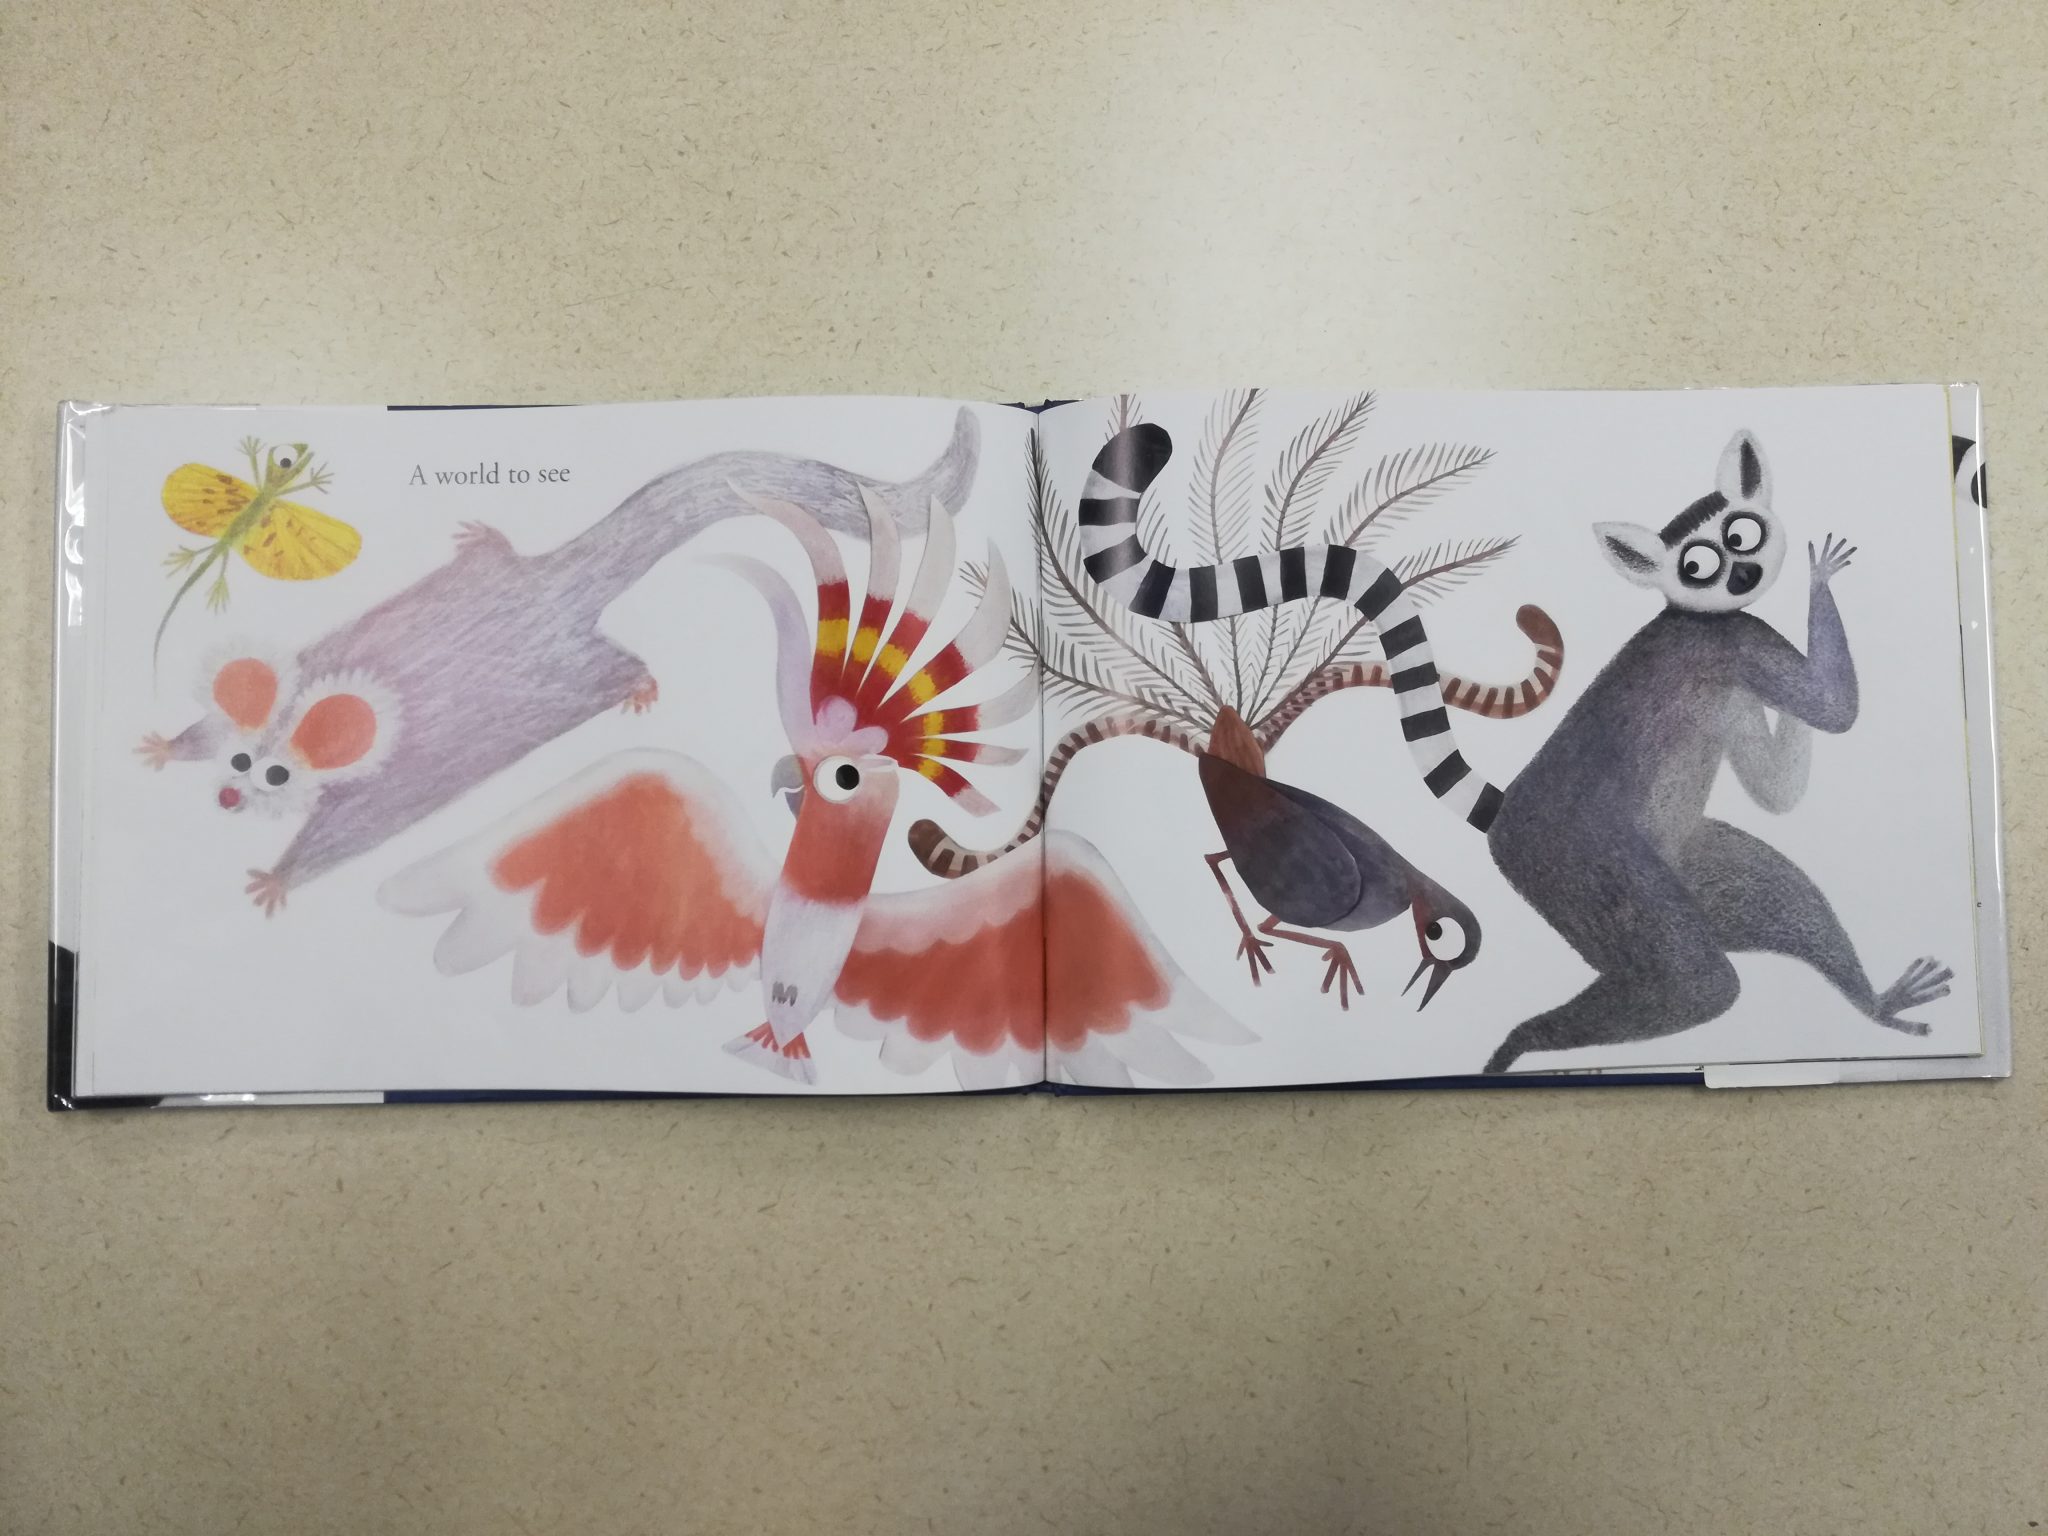 Animals leap off the pages in bright colors and patterns in Hello Hello.